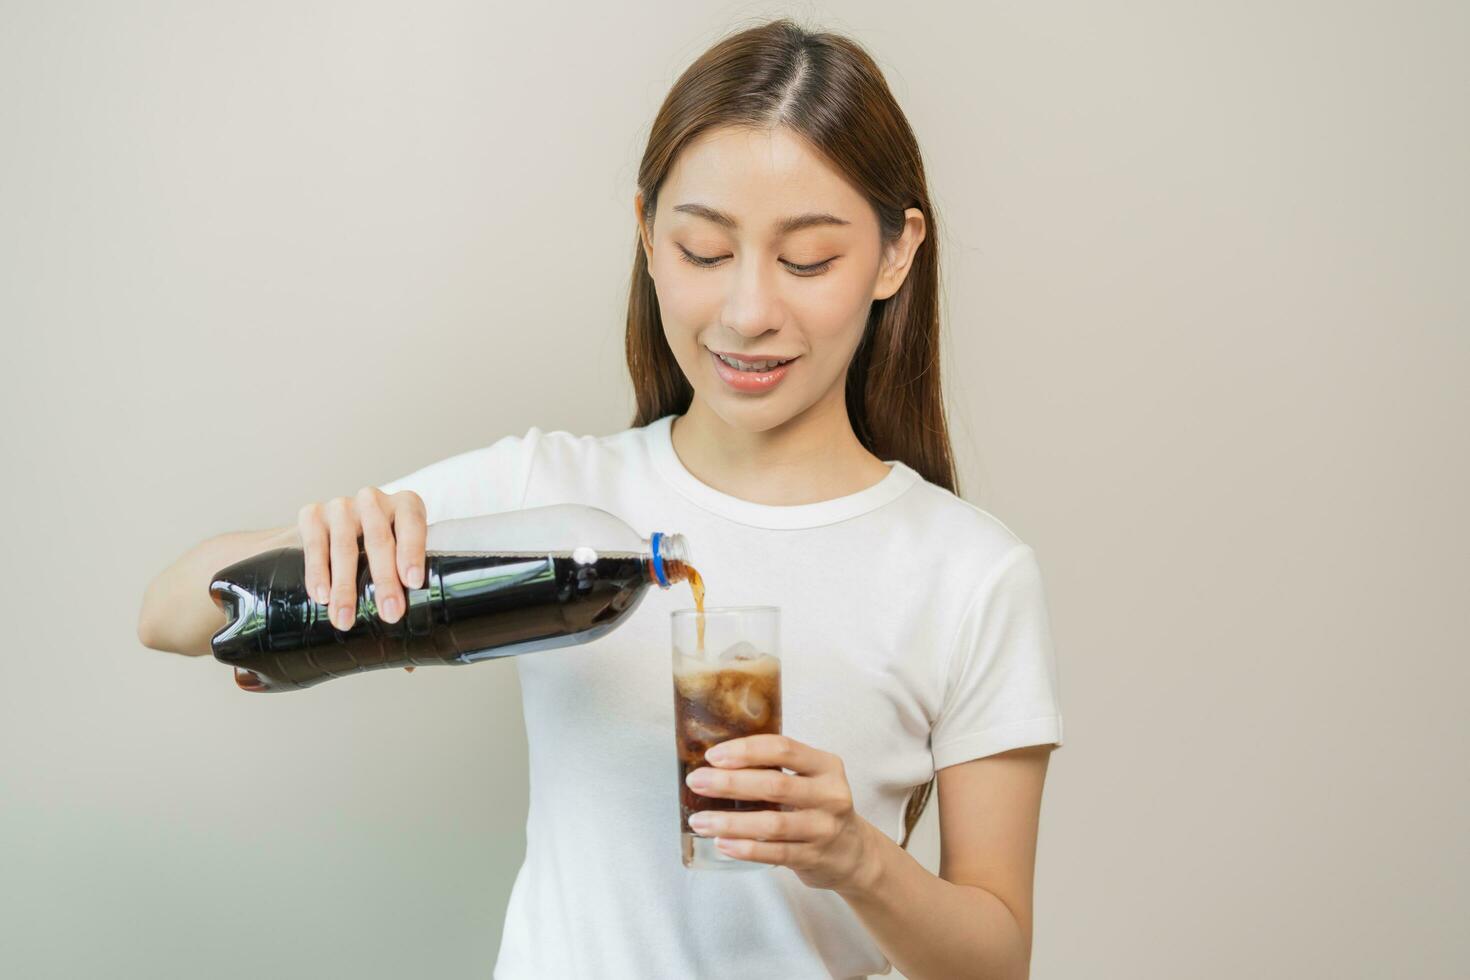 https://static.vecteezy.com/system/resources/previews/025/133/169/non_2x/thirsty-attractive-asian-young-woman-girl-holding-pouring-cold-sparkling-water-with-ice-from-cola-bottle-into-glass-in-her-hand-health-care-healthy-lifestyle-concept-isolated-on-white-background-free-photo.jpg